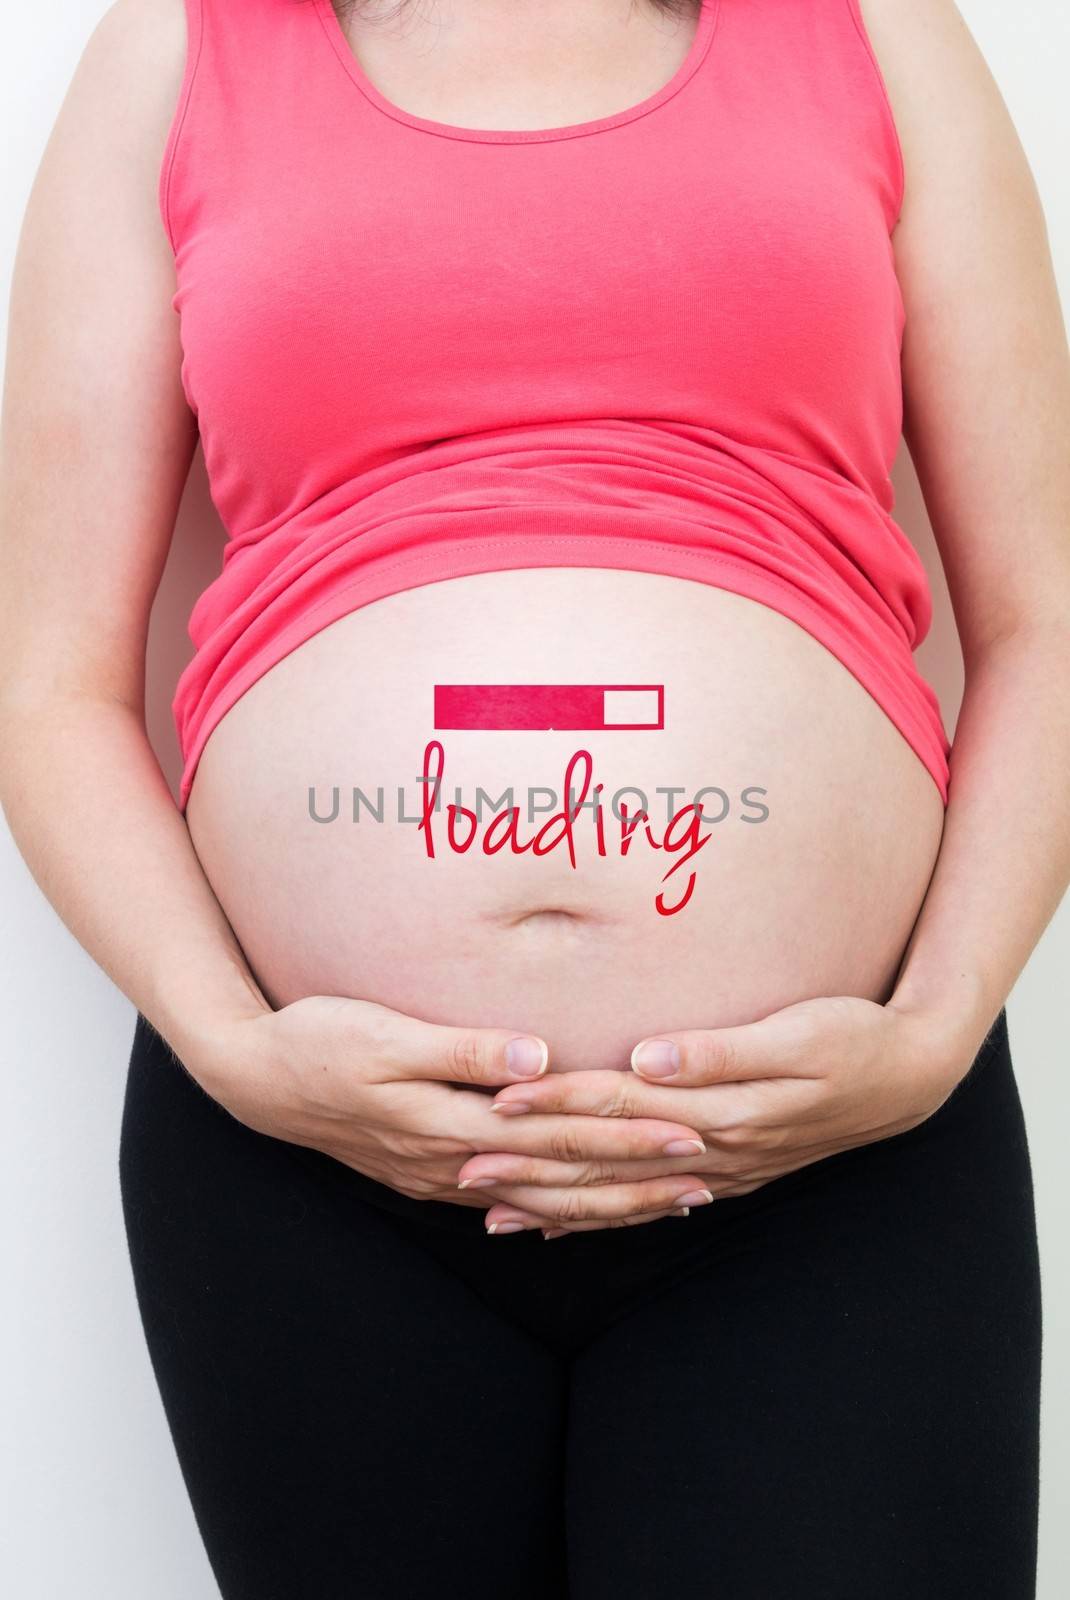 Pregnant woman with loading concept painted on her belly by simpson33